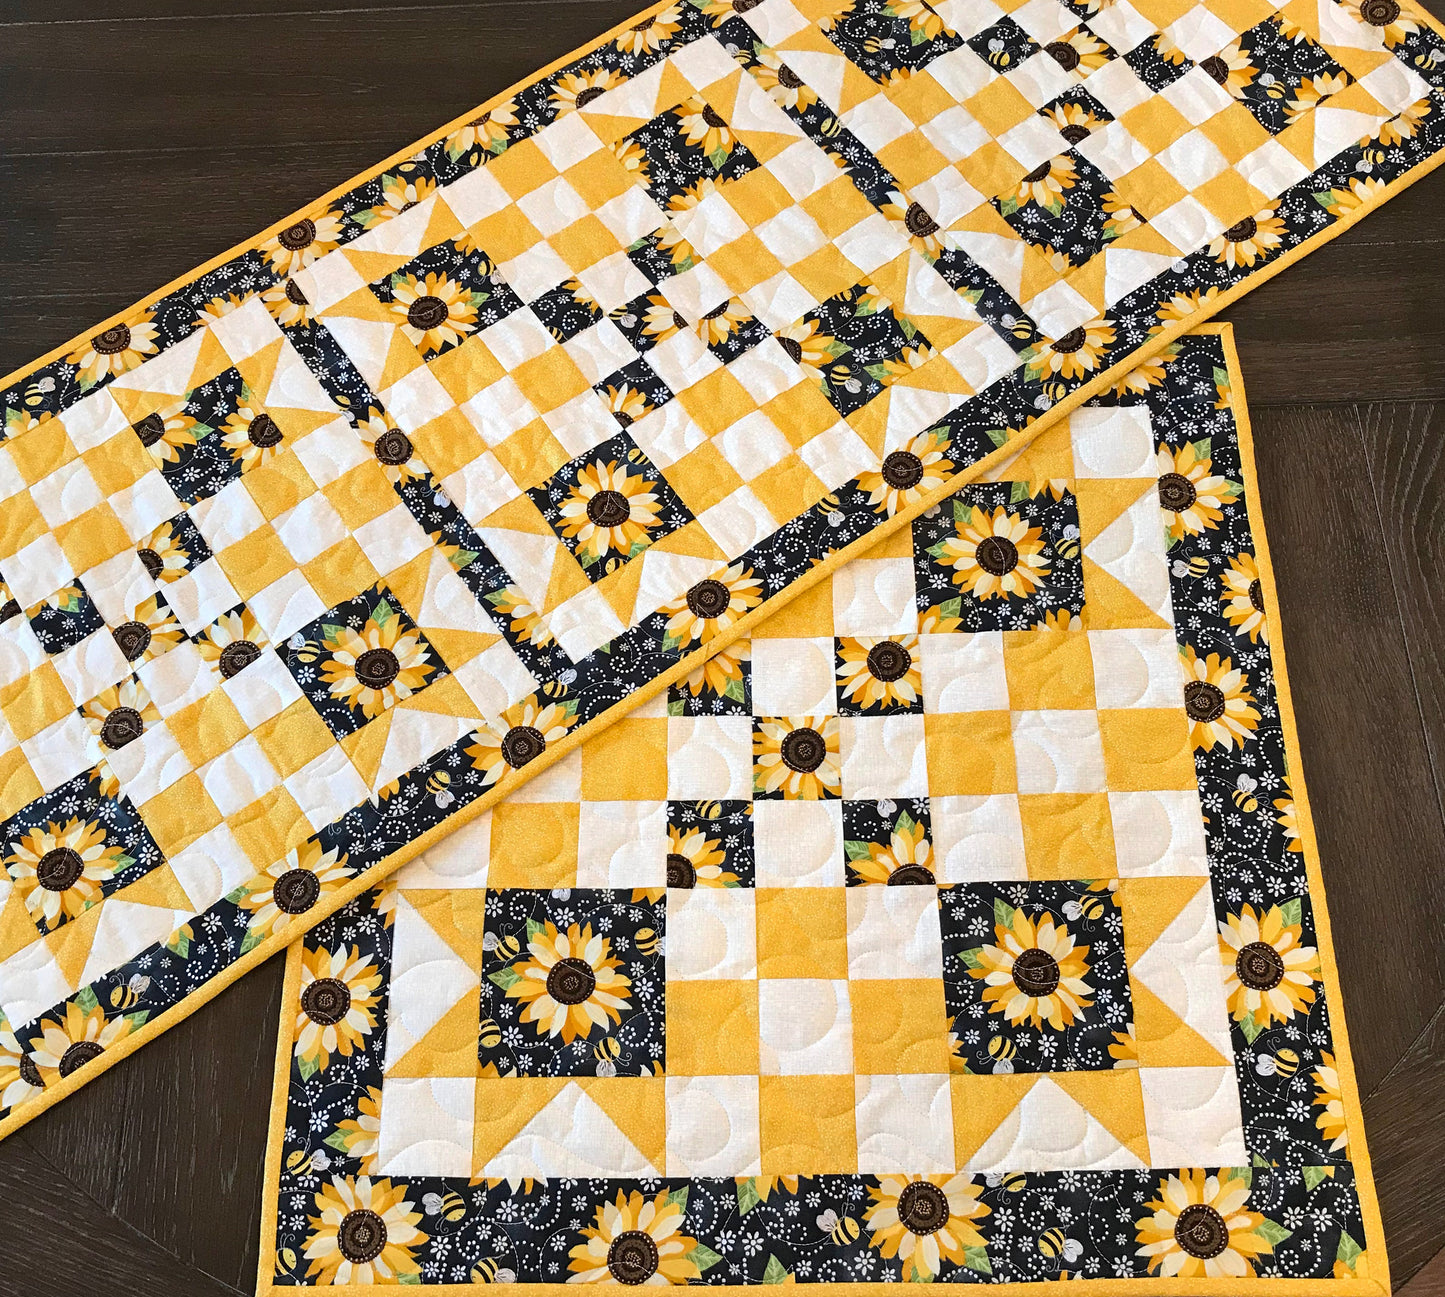 runner and topper displayed on a table for pattern for a table runner or table topper that has sawtooth star corner units with nine patch blocks in between.